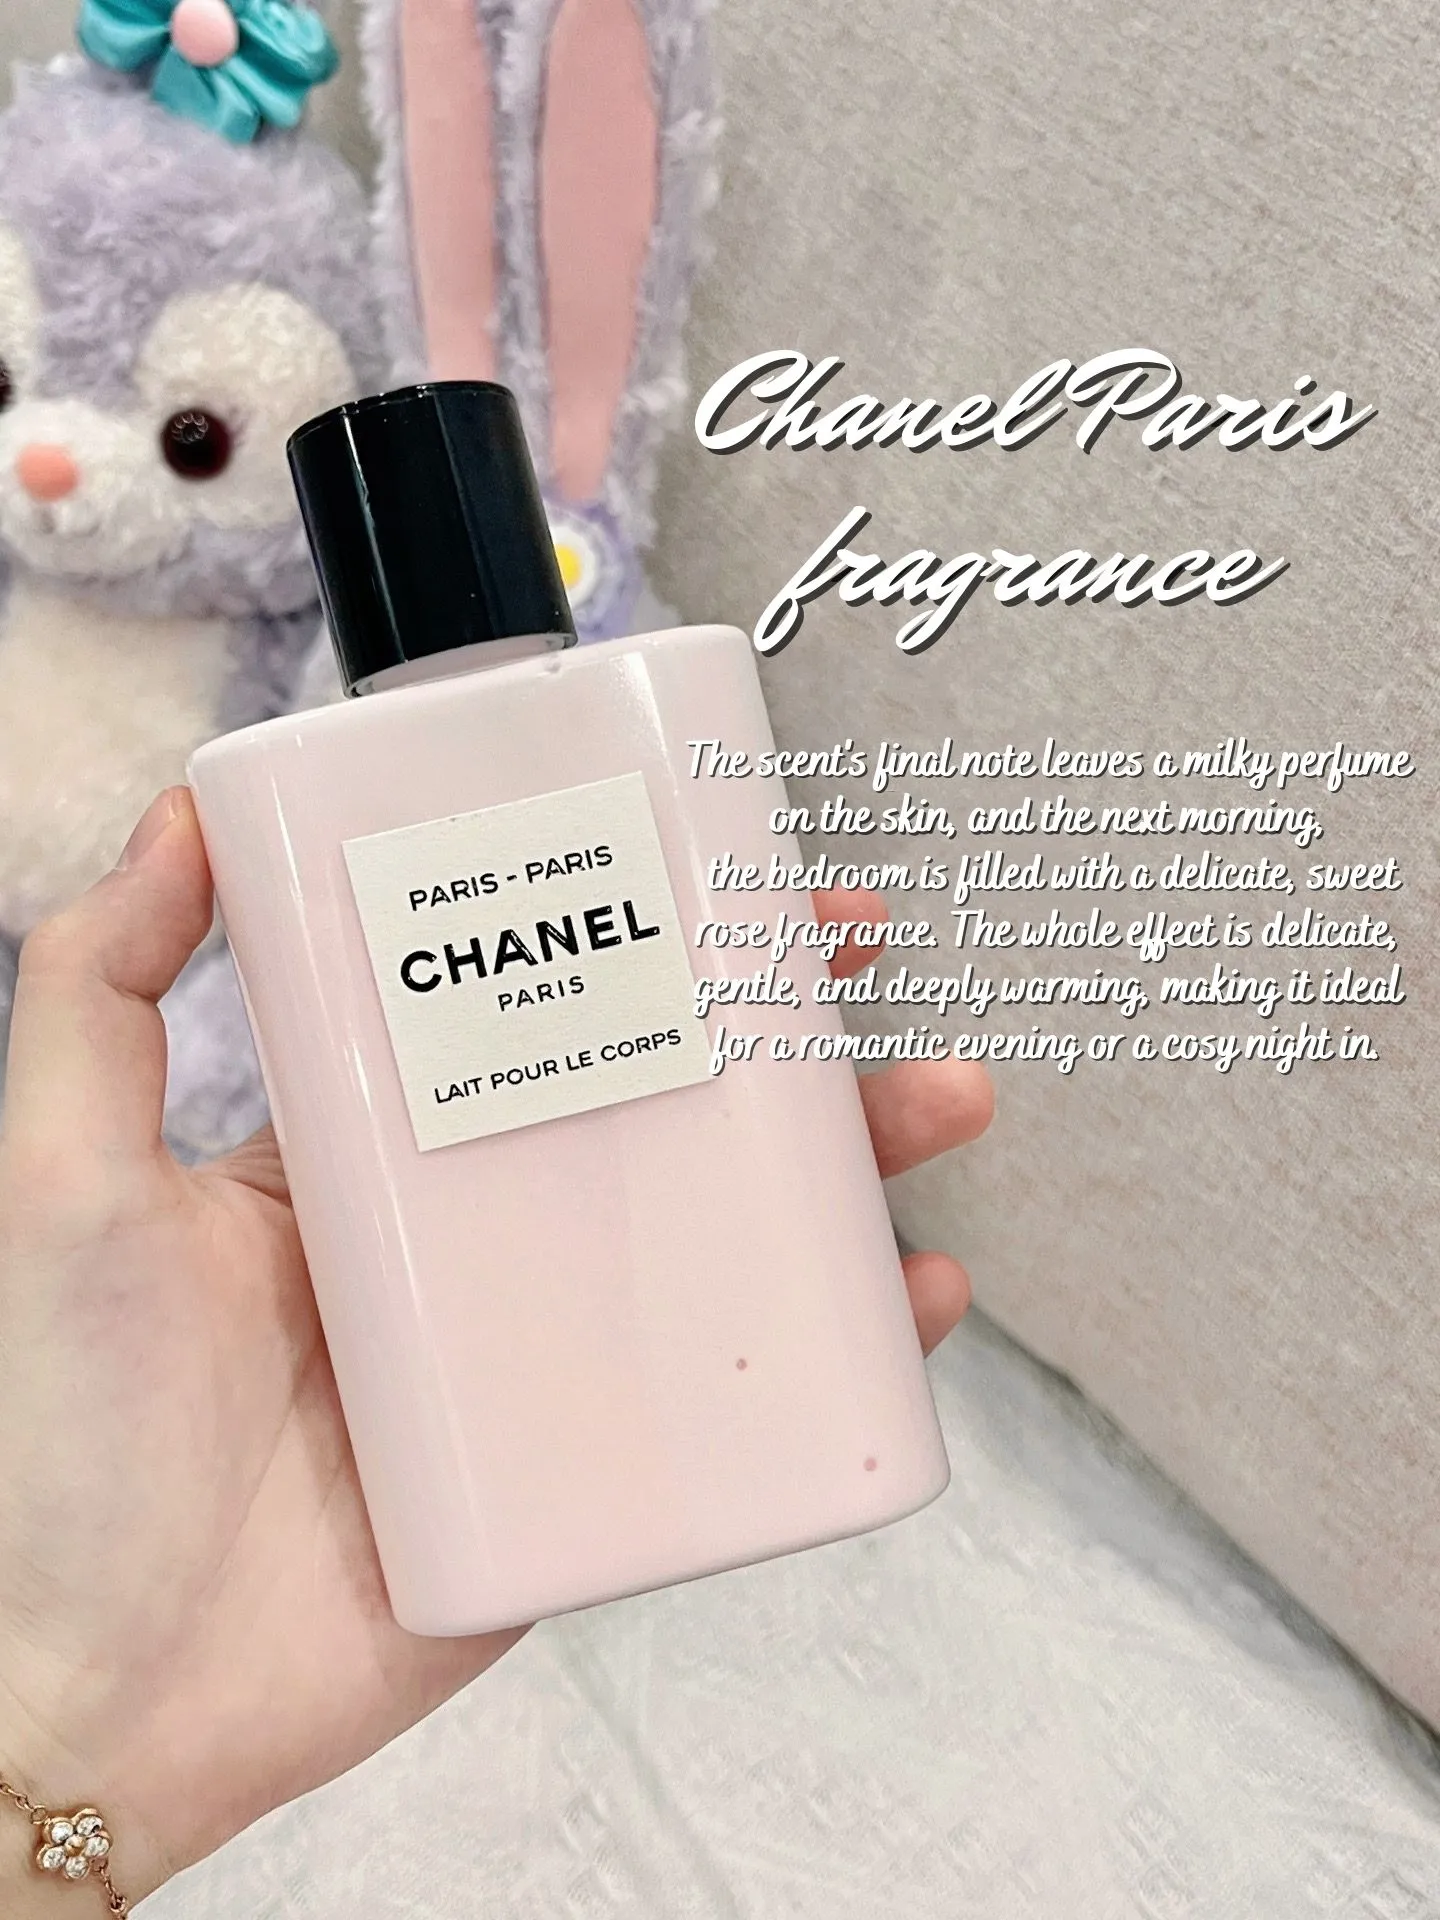 Paris-Venise CHANEL Fragrance Review / Perfume of the Month 